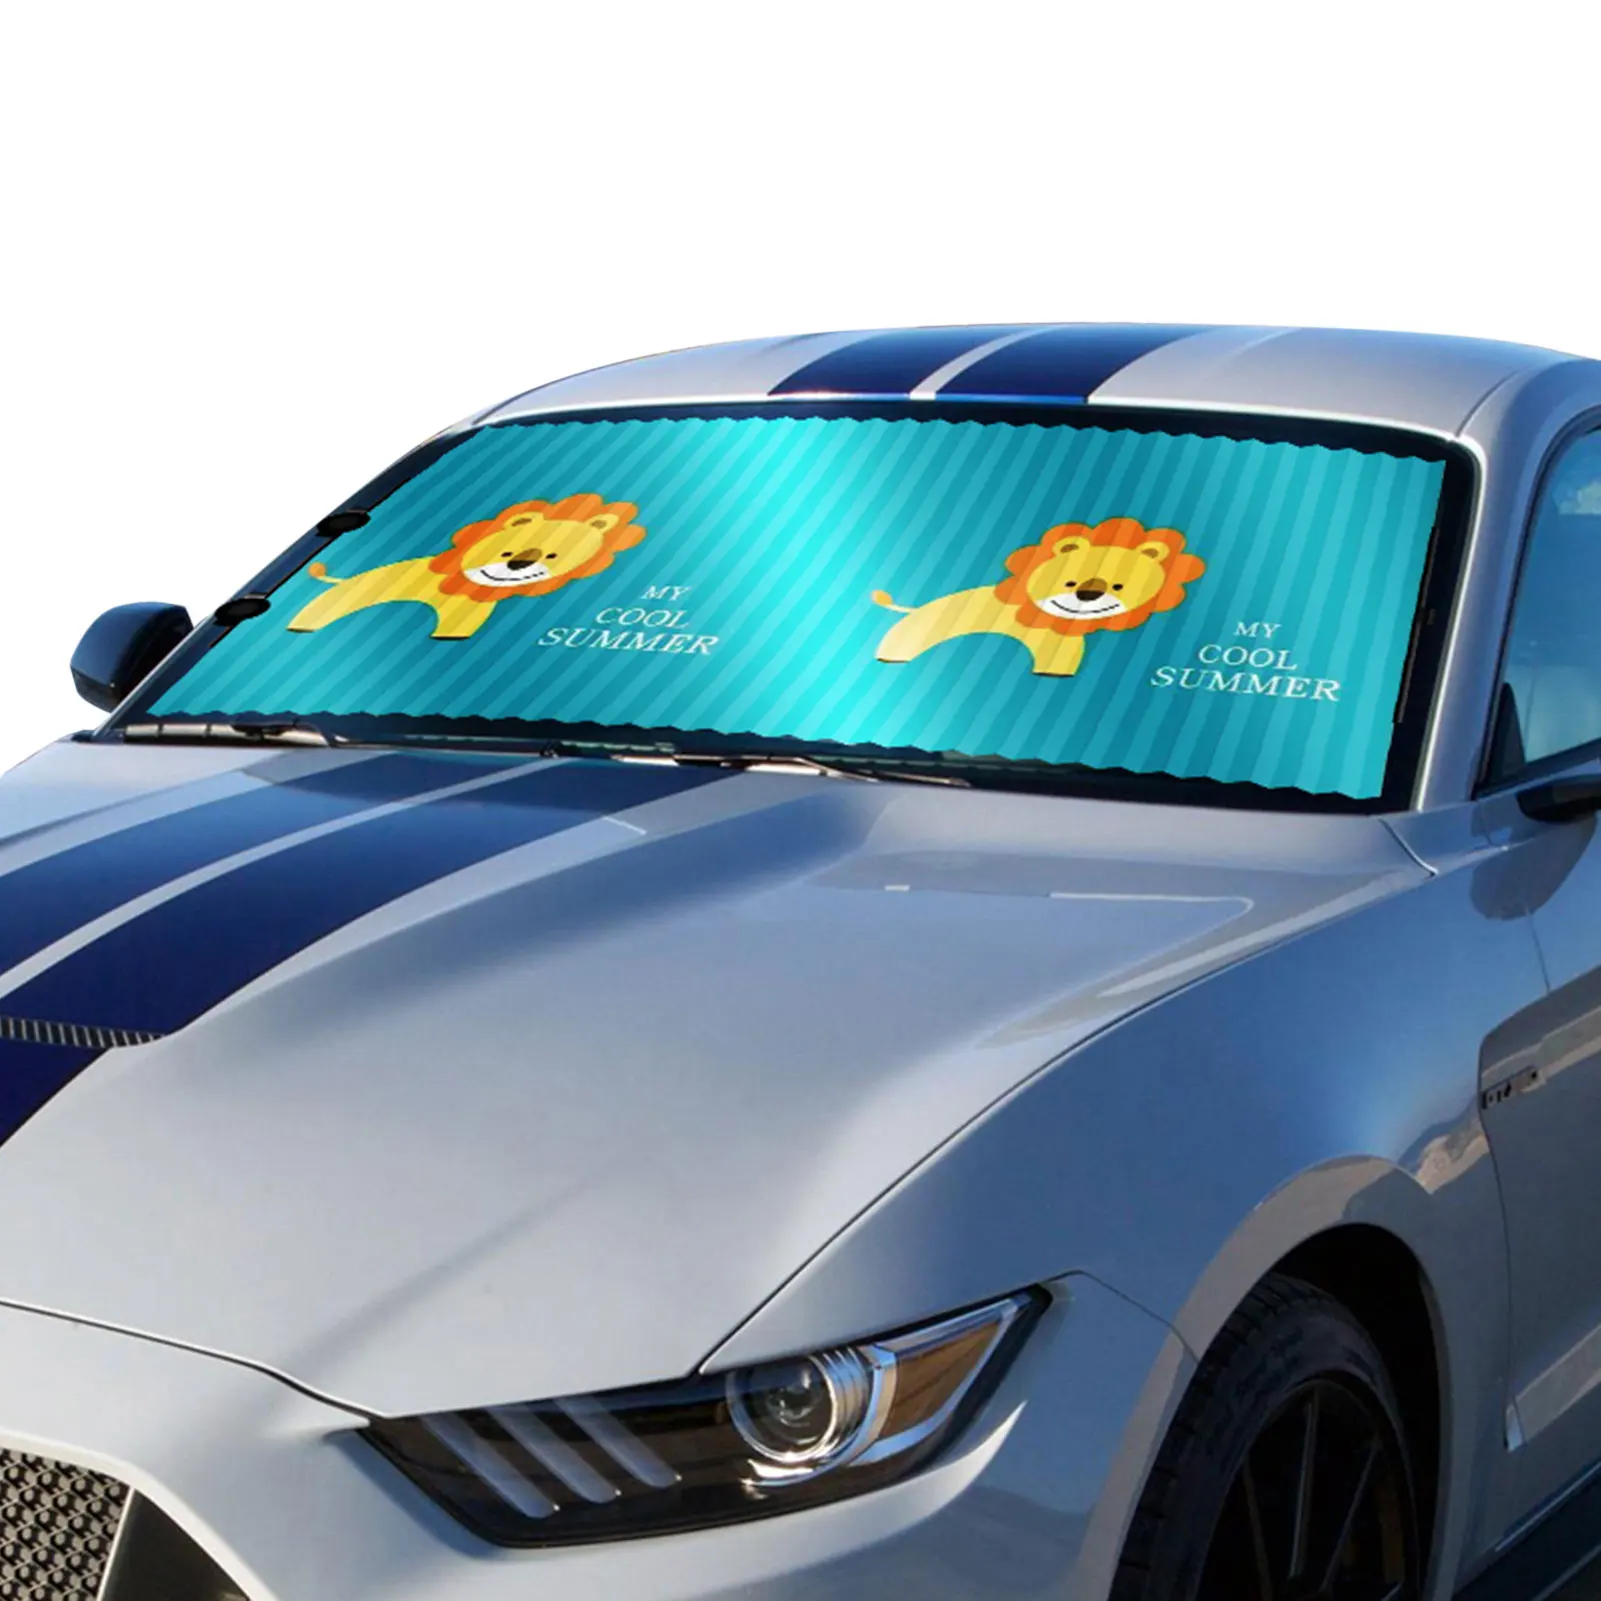 

Windshield Sun Shade For Car Retractable Cellular Sun Visor Protector Keep The Vehicle Cool Honeycomb Sunshade Fits Various